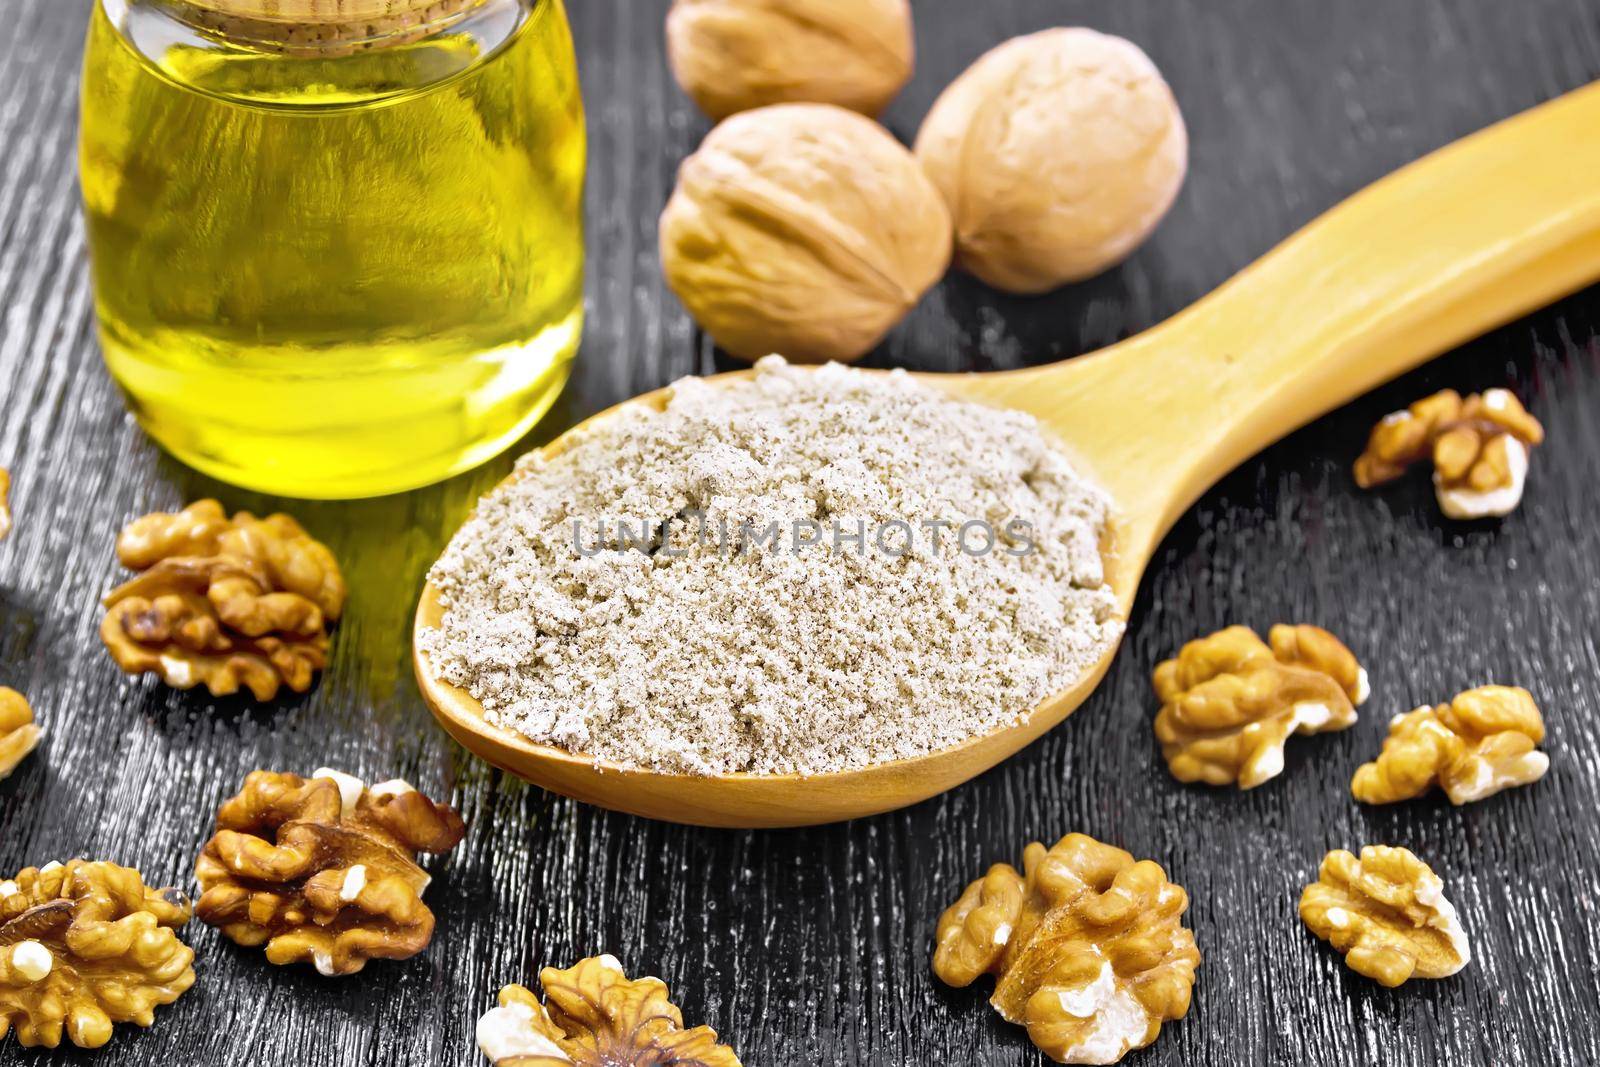 Walnut flour in a spoon, nuts on the table and oil in a glass jar on background of dark wooden board